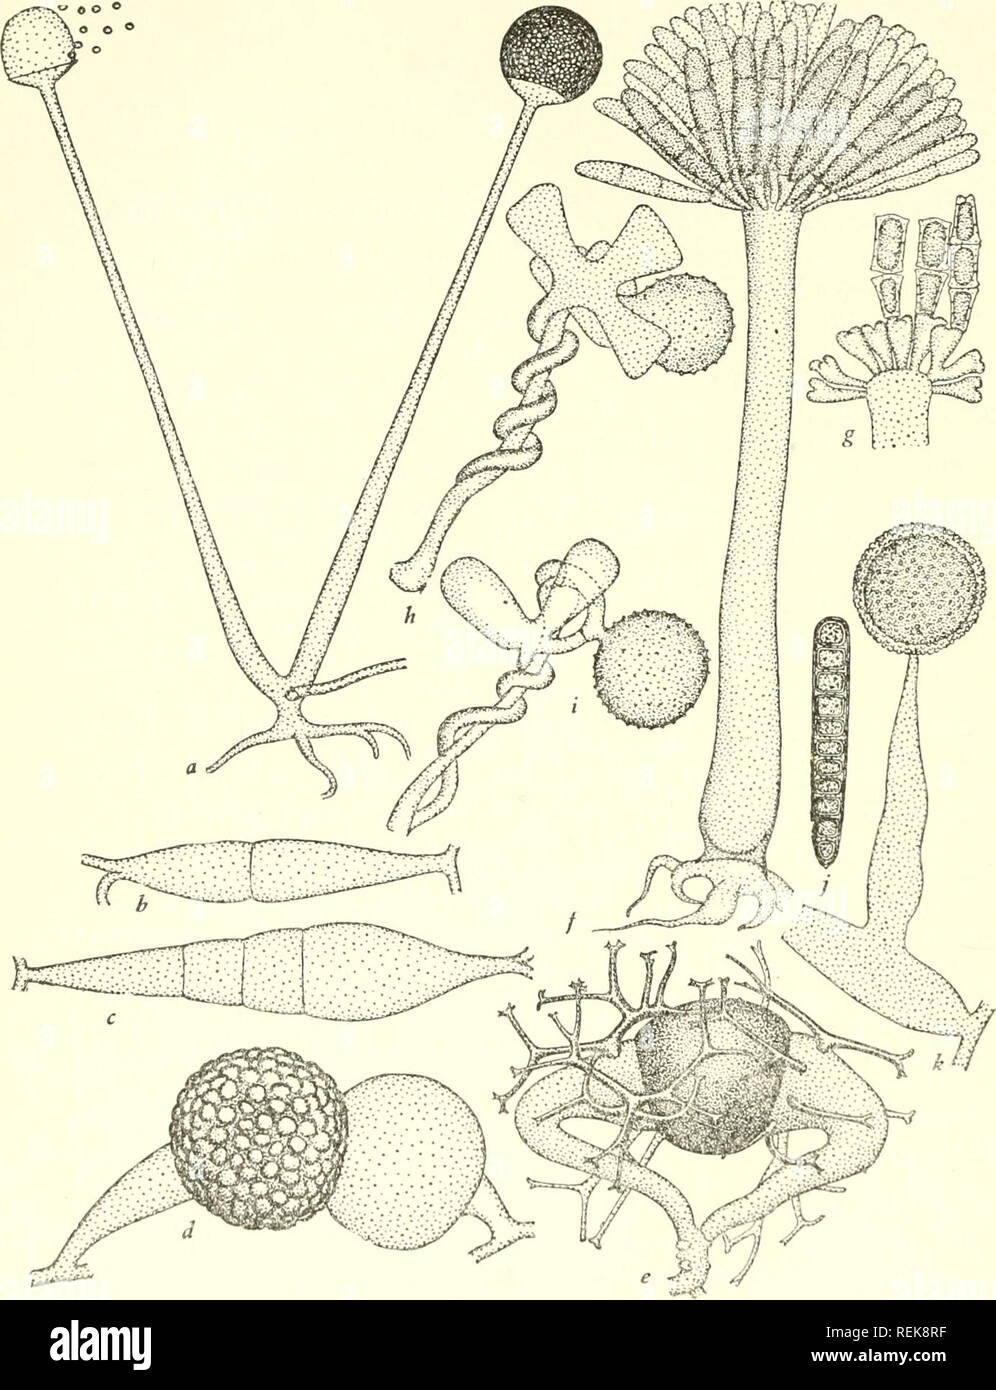 . The classification of lower organisms. Biology. 122] 'I'hc Classification of Lower Organisms. Fig. 24.—Zygomycetes: a-d, Rhizopus nigricans; a, sporangia x 50; b-d, prega- mctes, suspensors and gametes, and zygote x 200. e. Zygote of Phycomyccs nitens after Blakeslcc (1904). f, g, Conidiophore with young conidia, and mature conidia, of Syncephalis pycnosperma after Thaxtcr (1897). h, i, Conjugation of Synce- phalis nodosa after Thaxter, op. cit. j, Sporangium of Synccphalastrum raccmosum after Thaxter, op. cit. k, Sporangium of Flaplospoiangium lignicola after Martin (1937), x 1,000.. Please Stock Photo